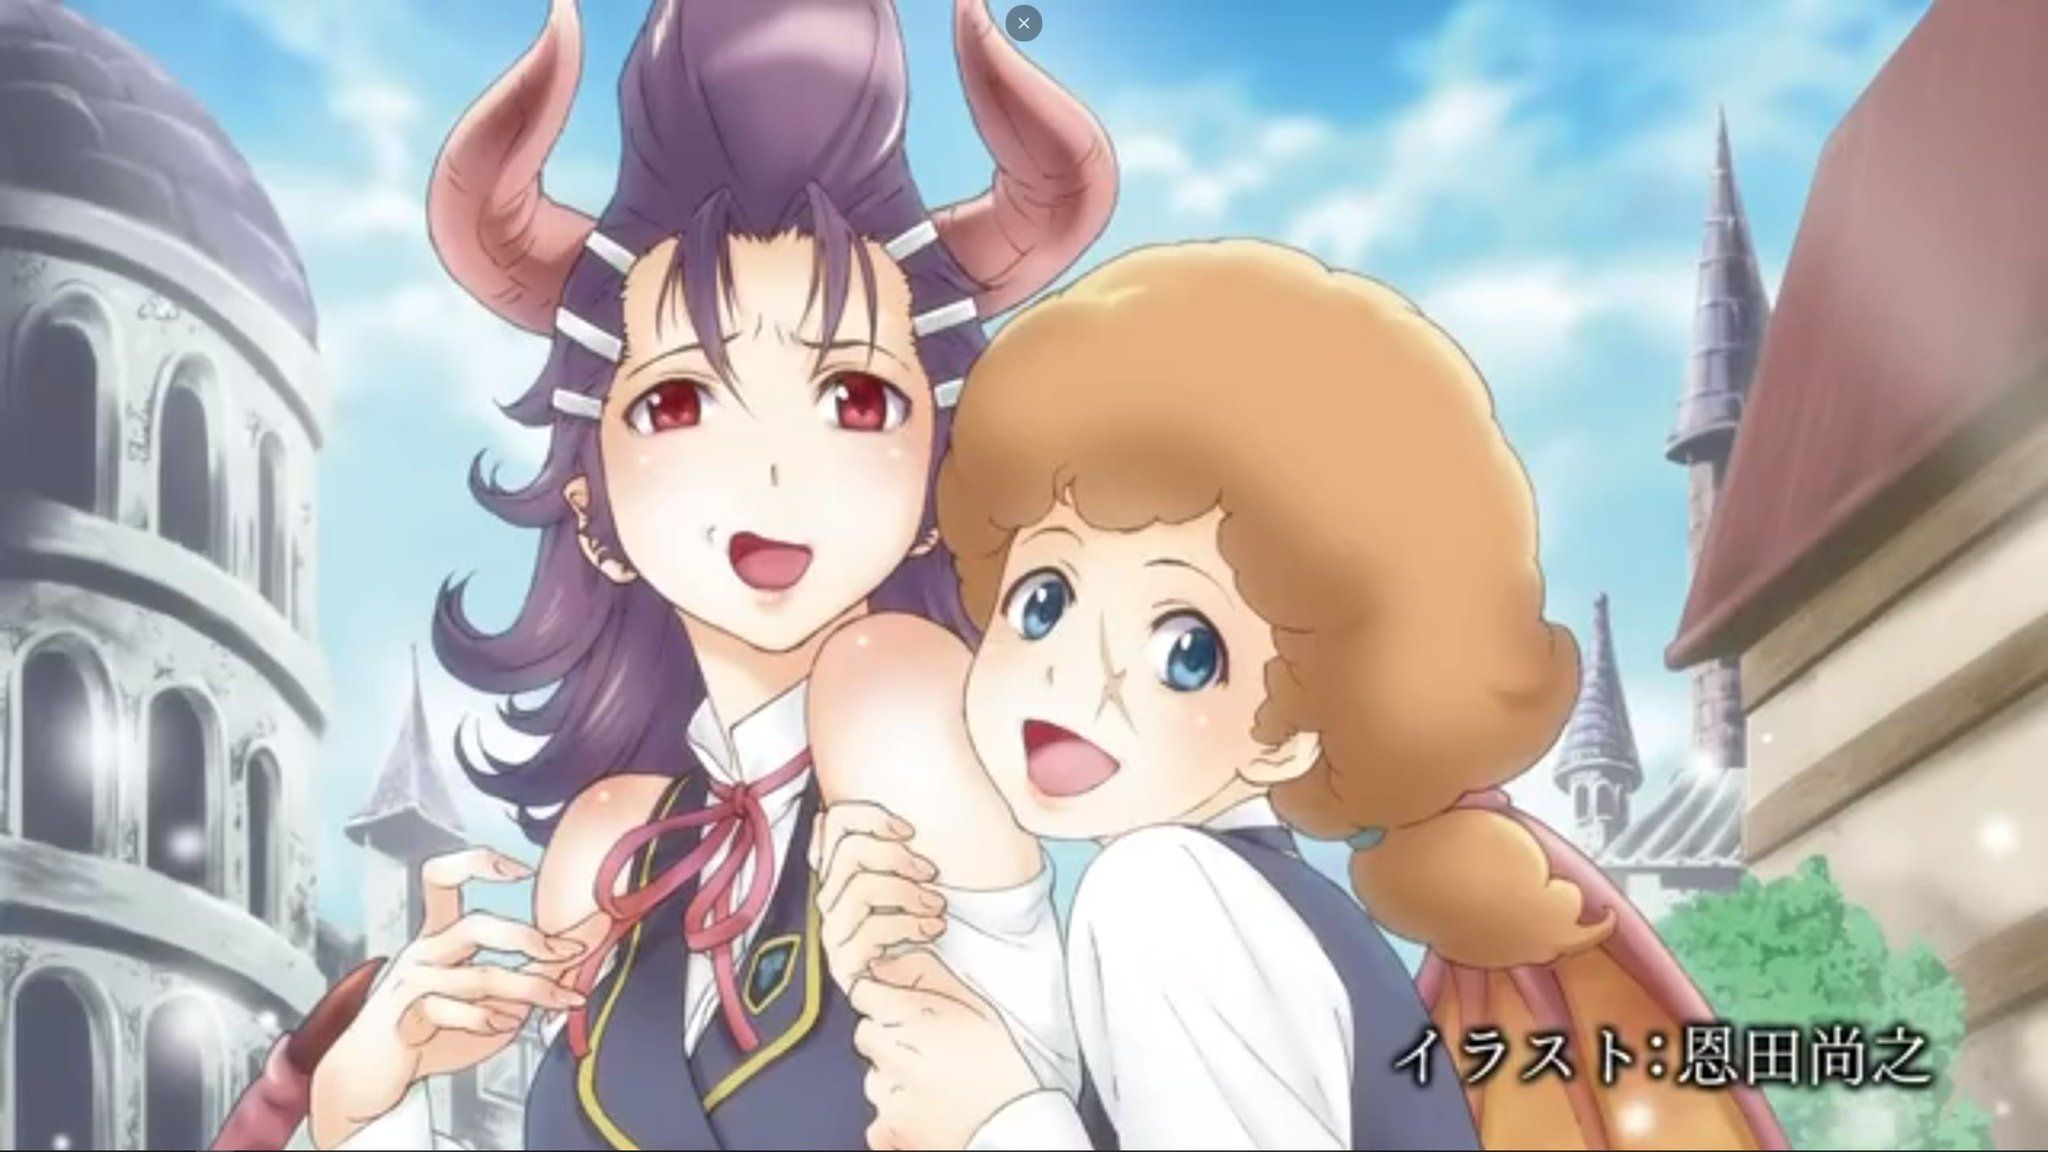 Granblue EN (Unofficial) ending title card of Mysteria Friends episode 1 has Kaisar and Favaro of Rage of Bahamut: Genesis dressed as Anne and Grea, which may be the